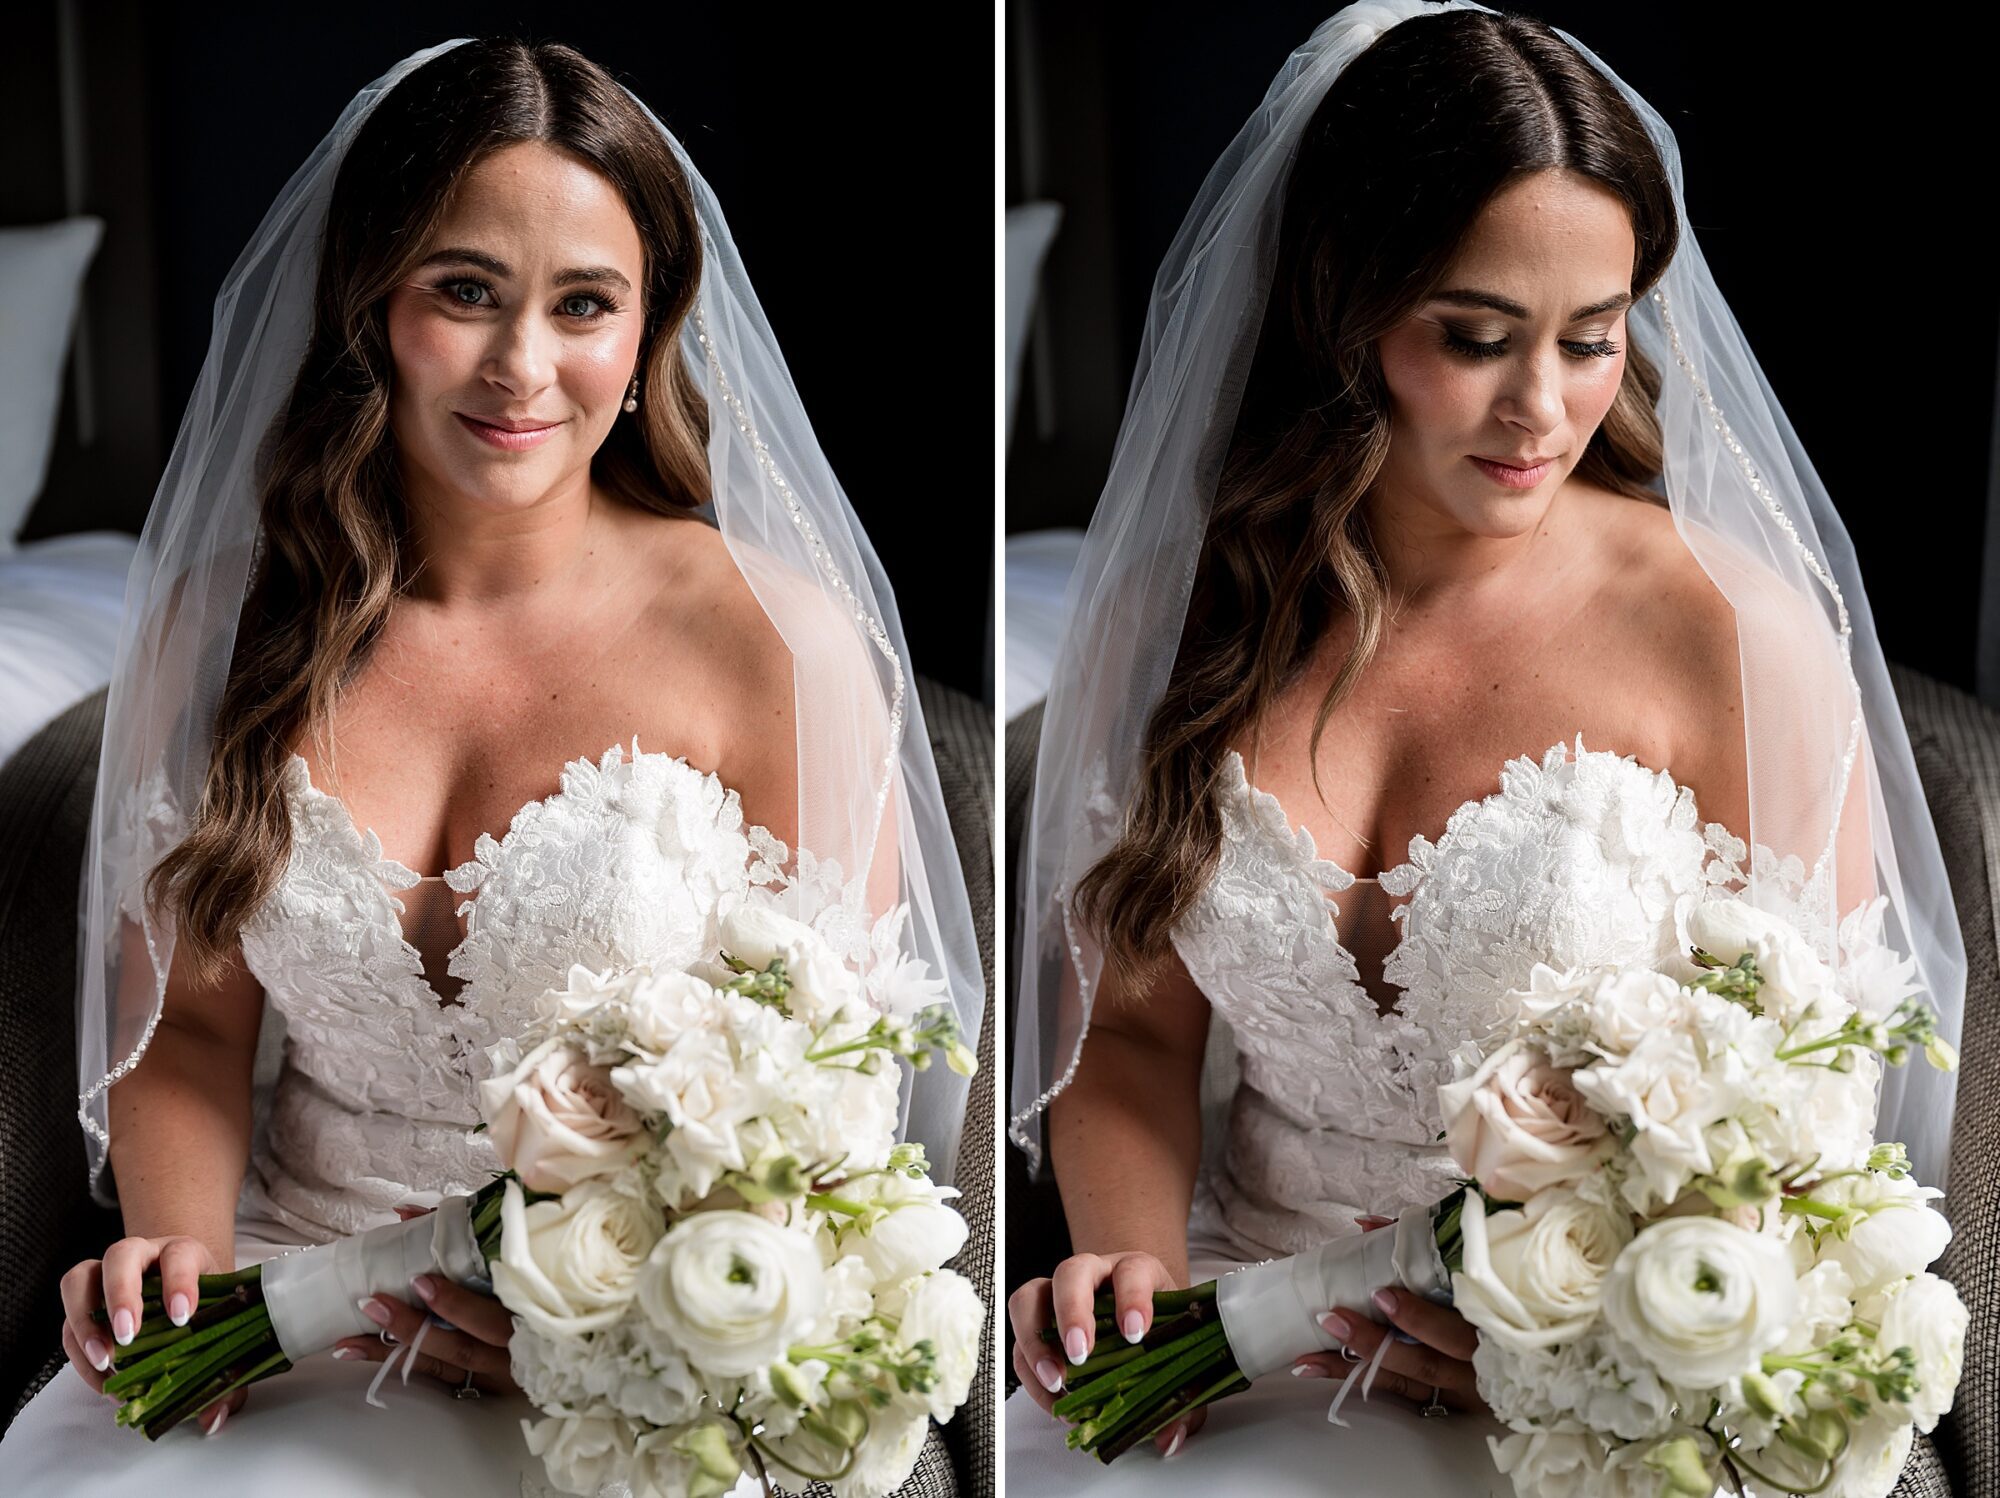 Two pictures of a bride holding a bouquet.